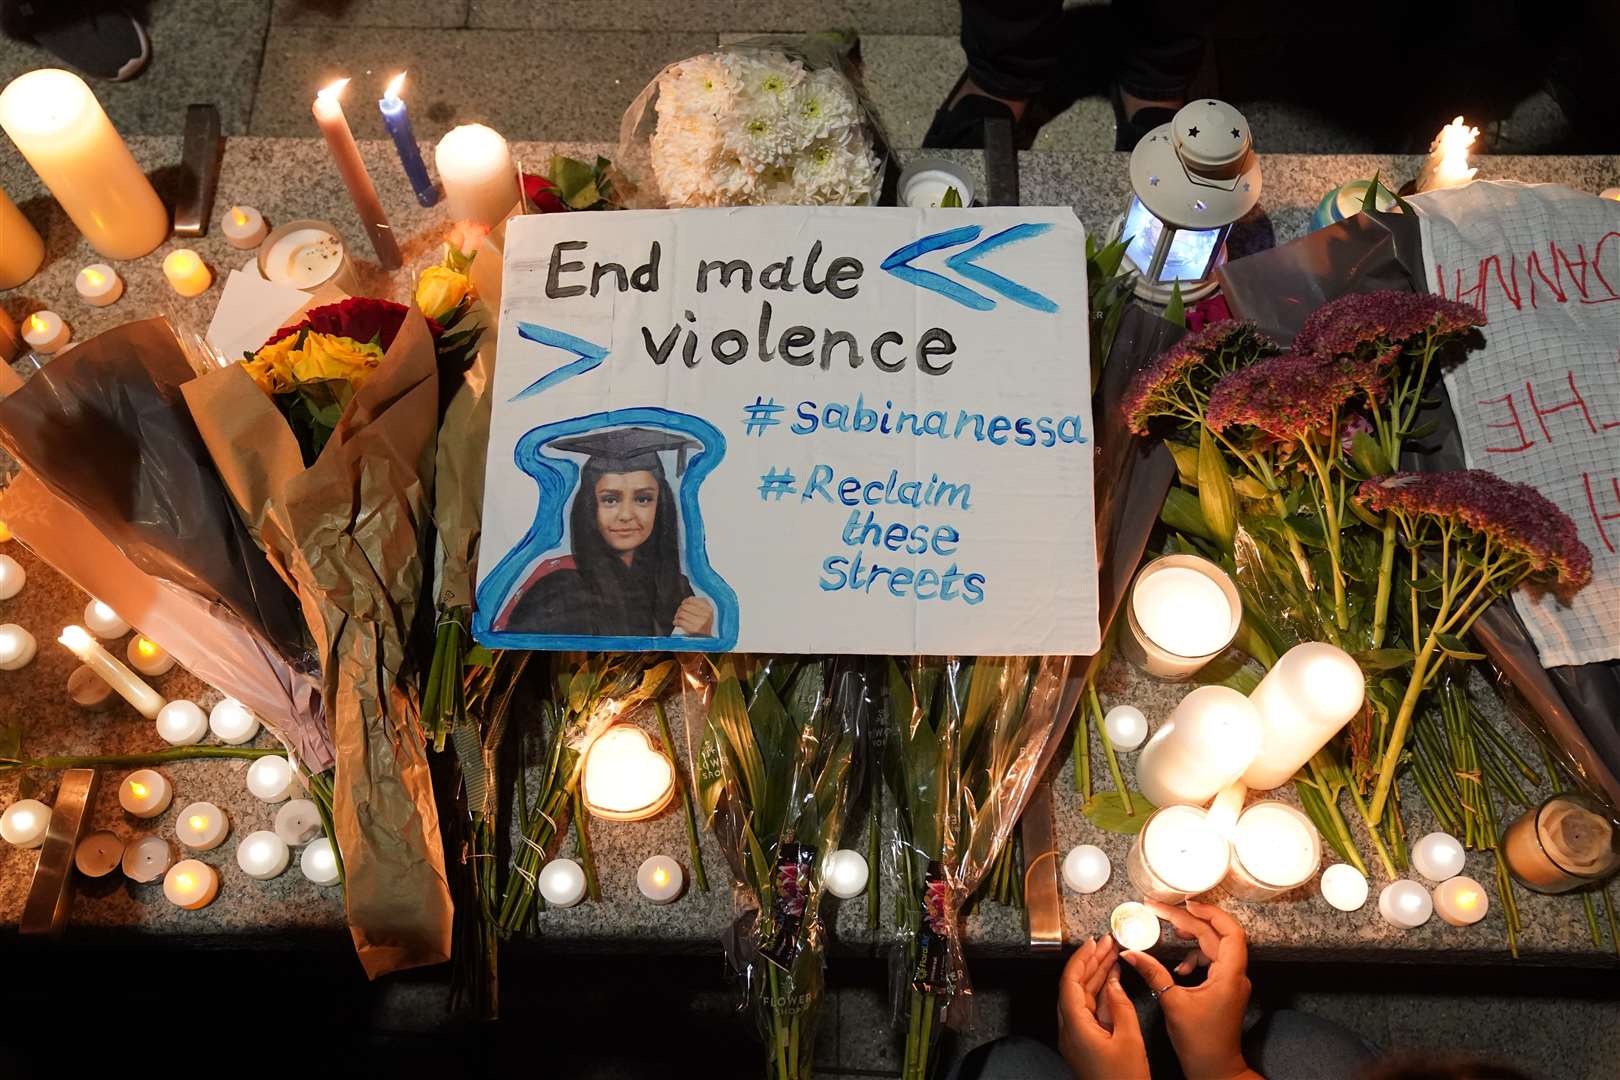 Messages were left among flowers and candles (Jonathan Brady/PA)